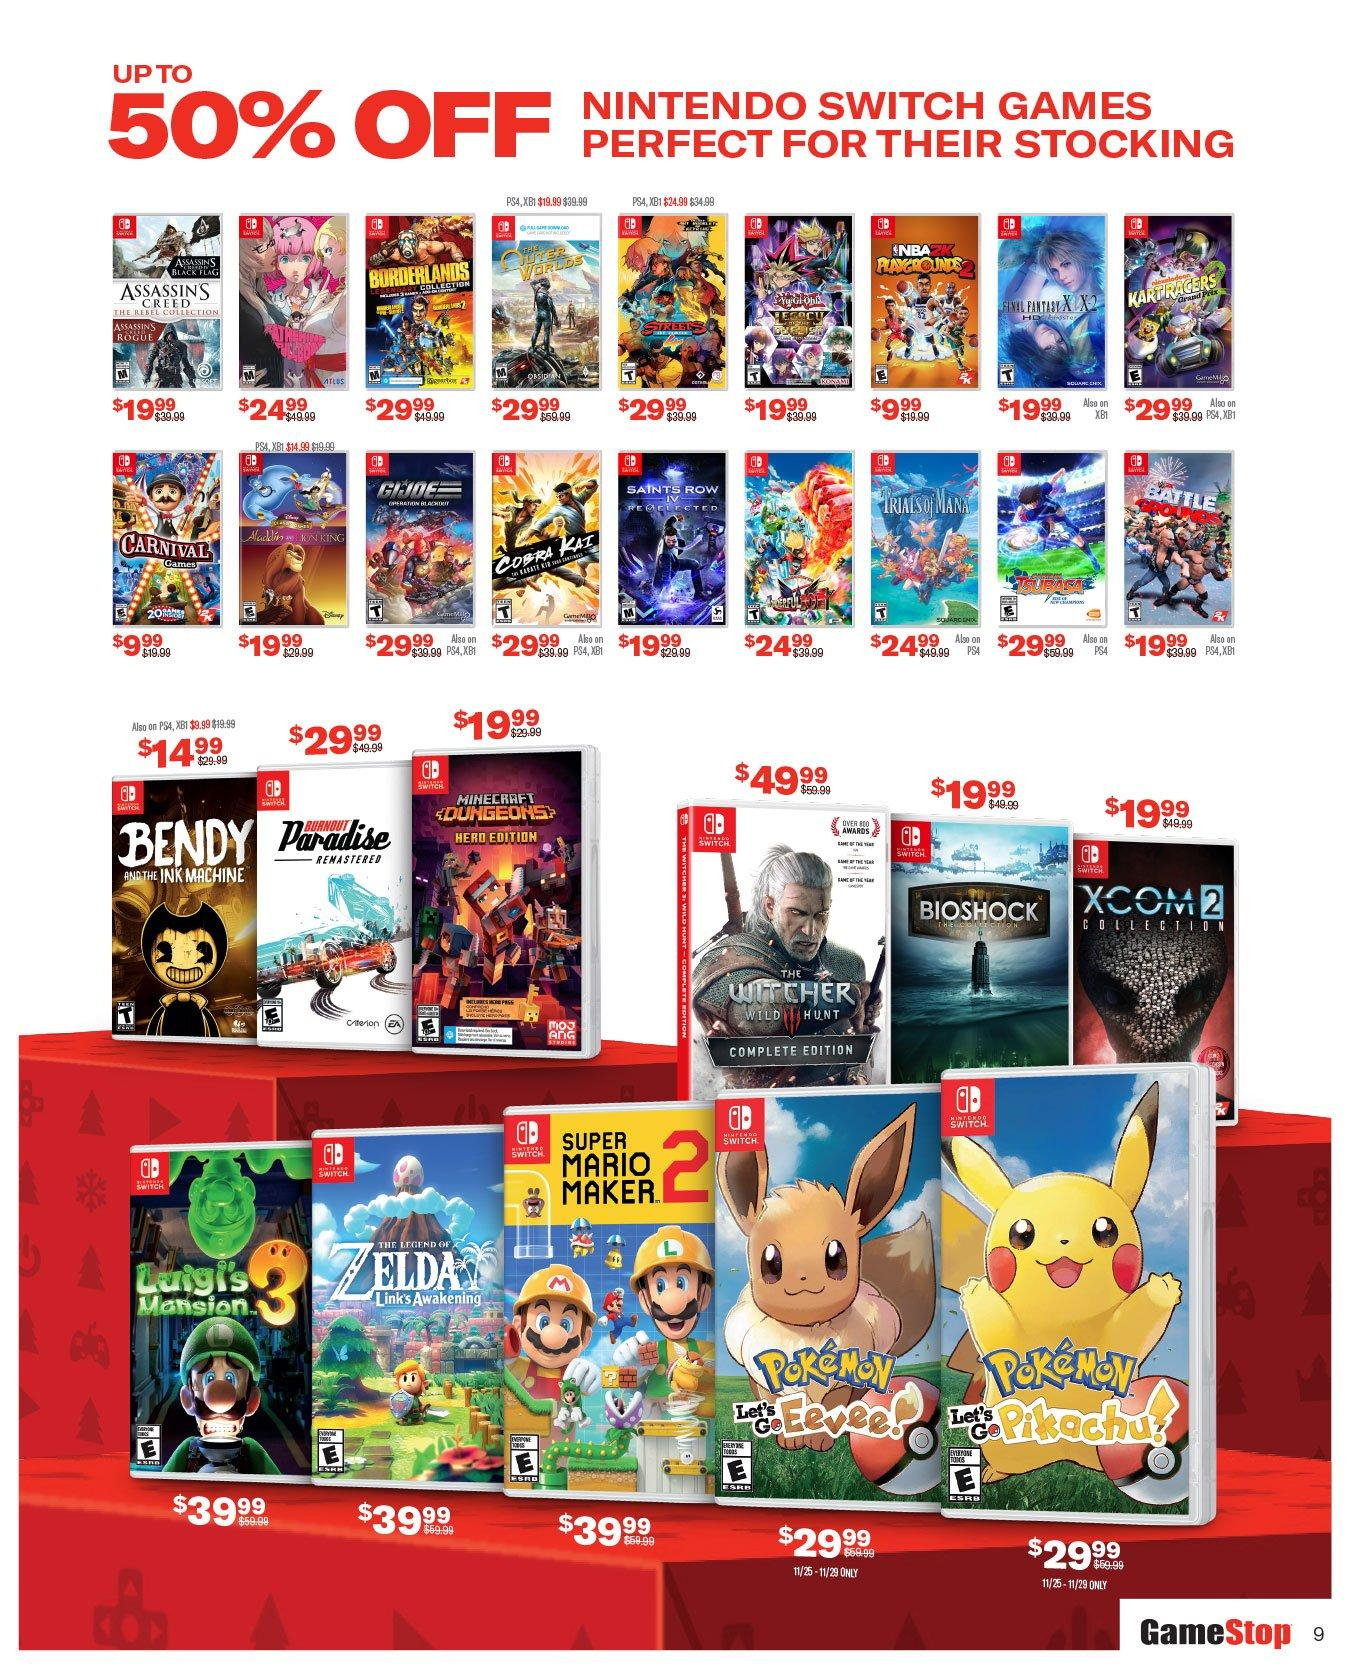 GameStop reveals their Black Friday deals, many Nintendo Switch titles